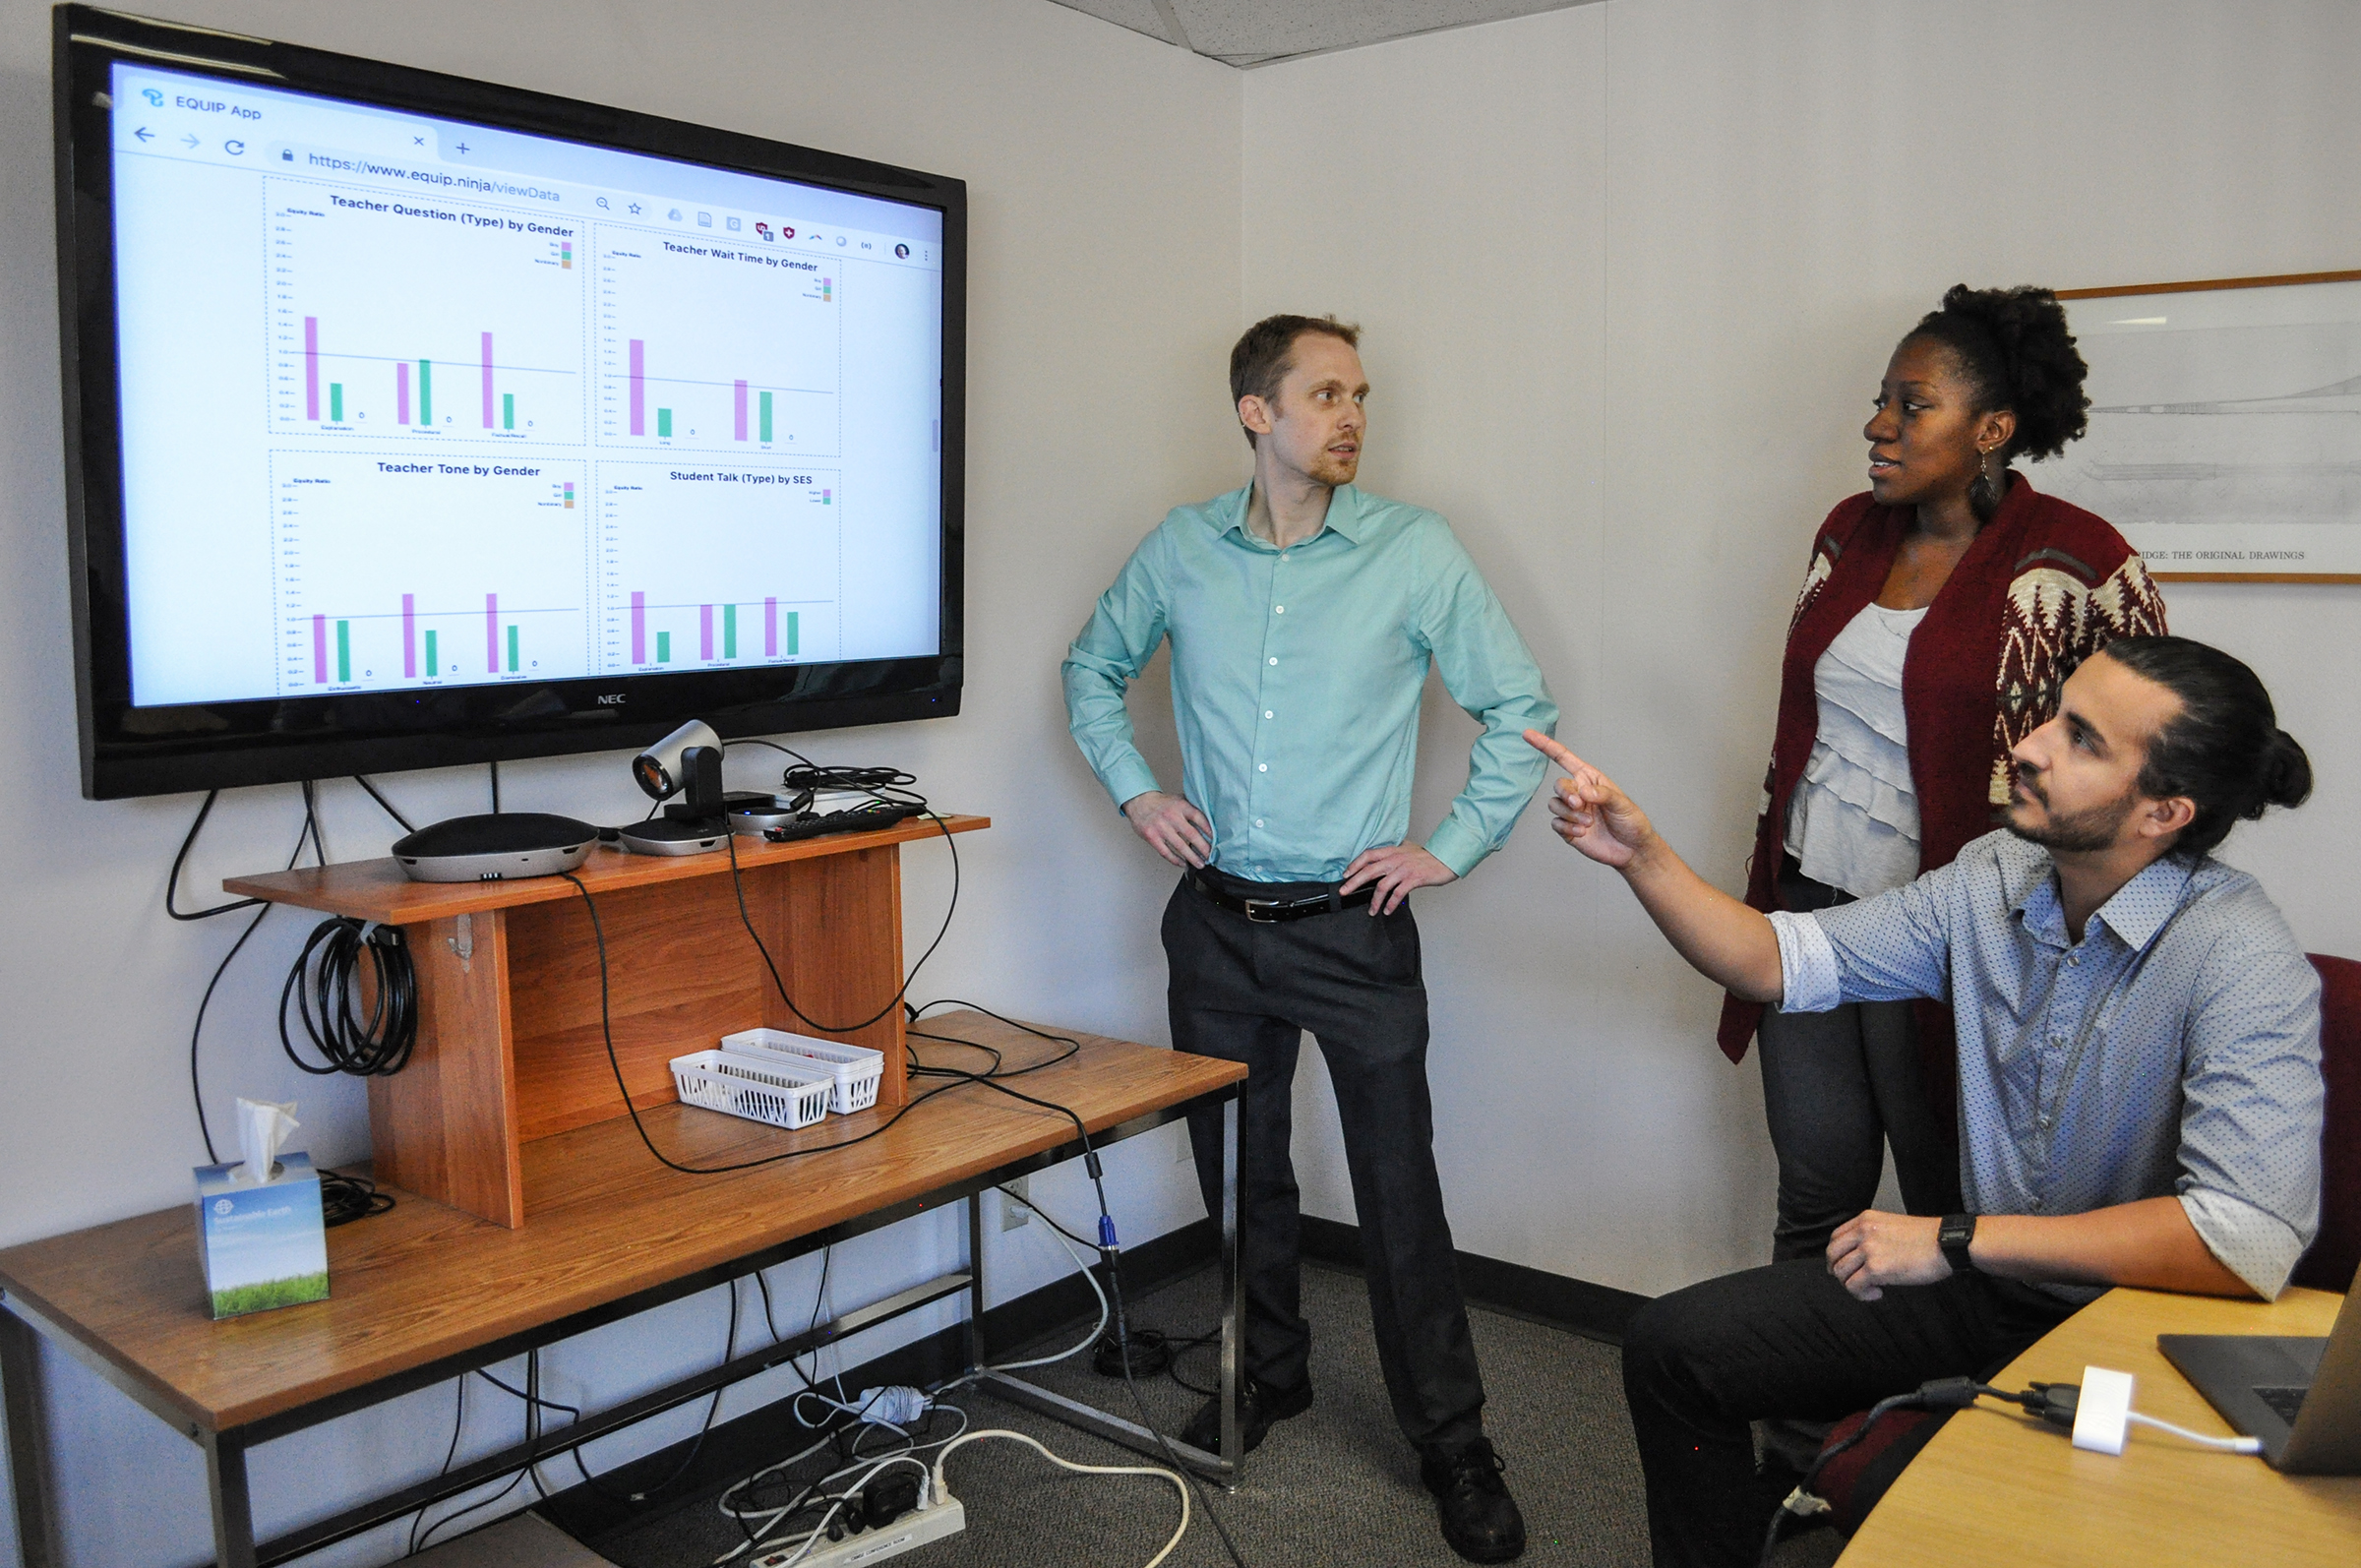 Dr. Daniel Reinholz, Amelia StoneJohnstone, and Antonio Martinez working with analytics generated by the EQUIP observation tool. Photo by Christine Luu